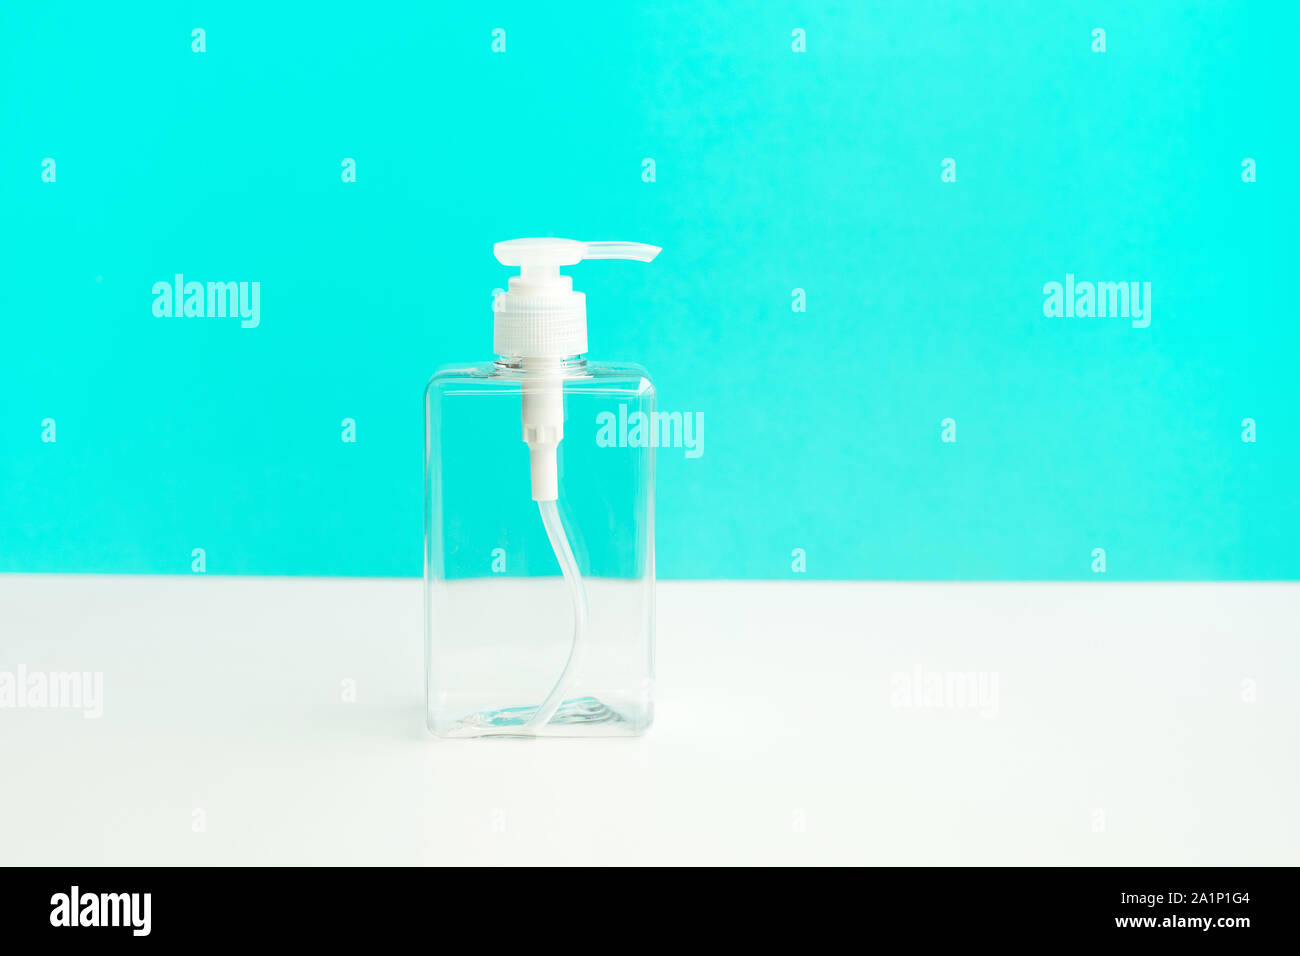 Bottle lotion transparent on blue background. healthy and body concepts ideas Stock Photo